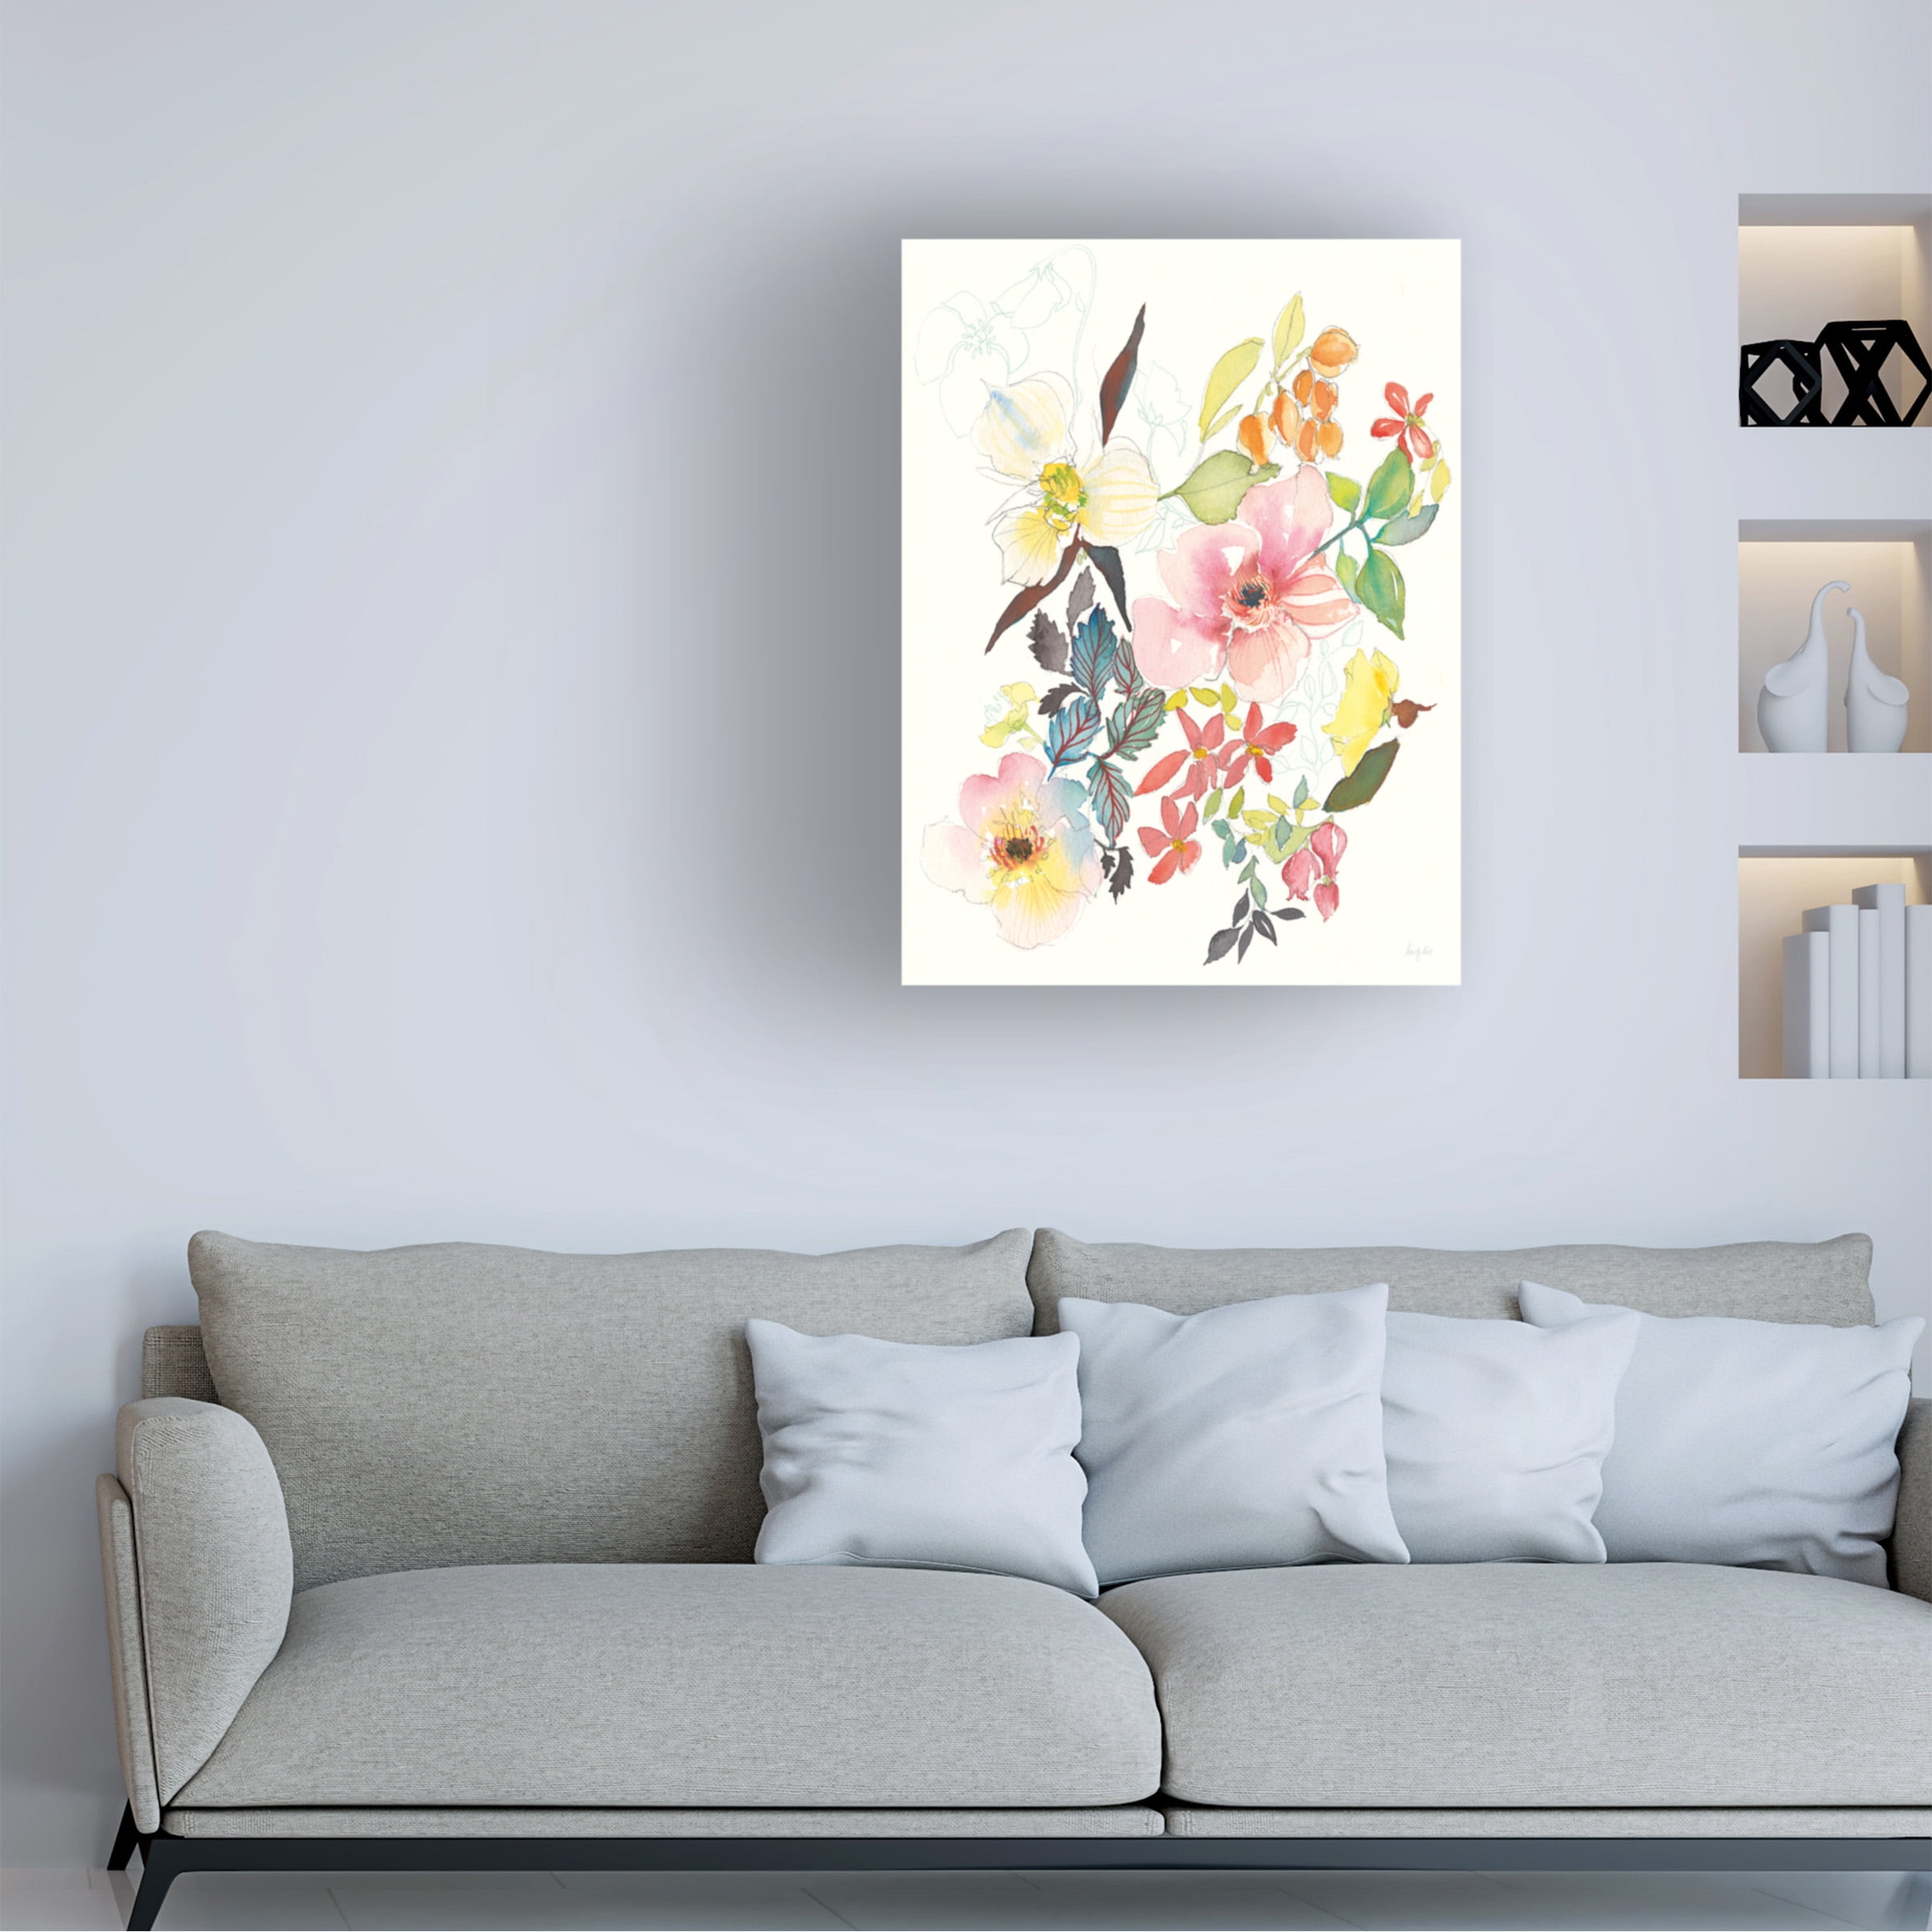 Citrus Summer I v2 by Kristy Rice 23-in. W x 16-in. H. Canvas Wall